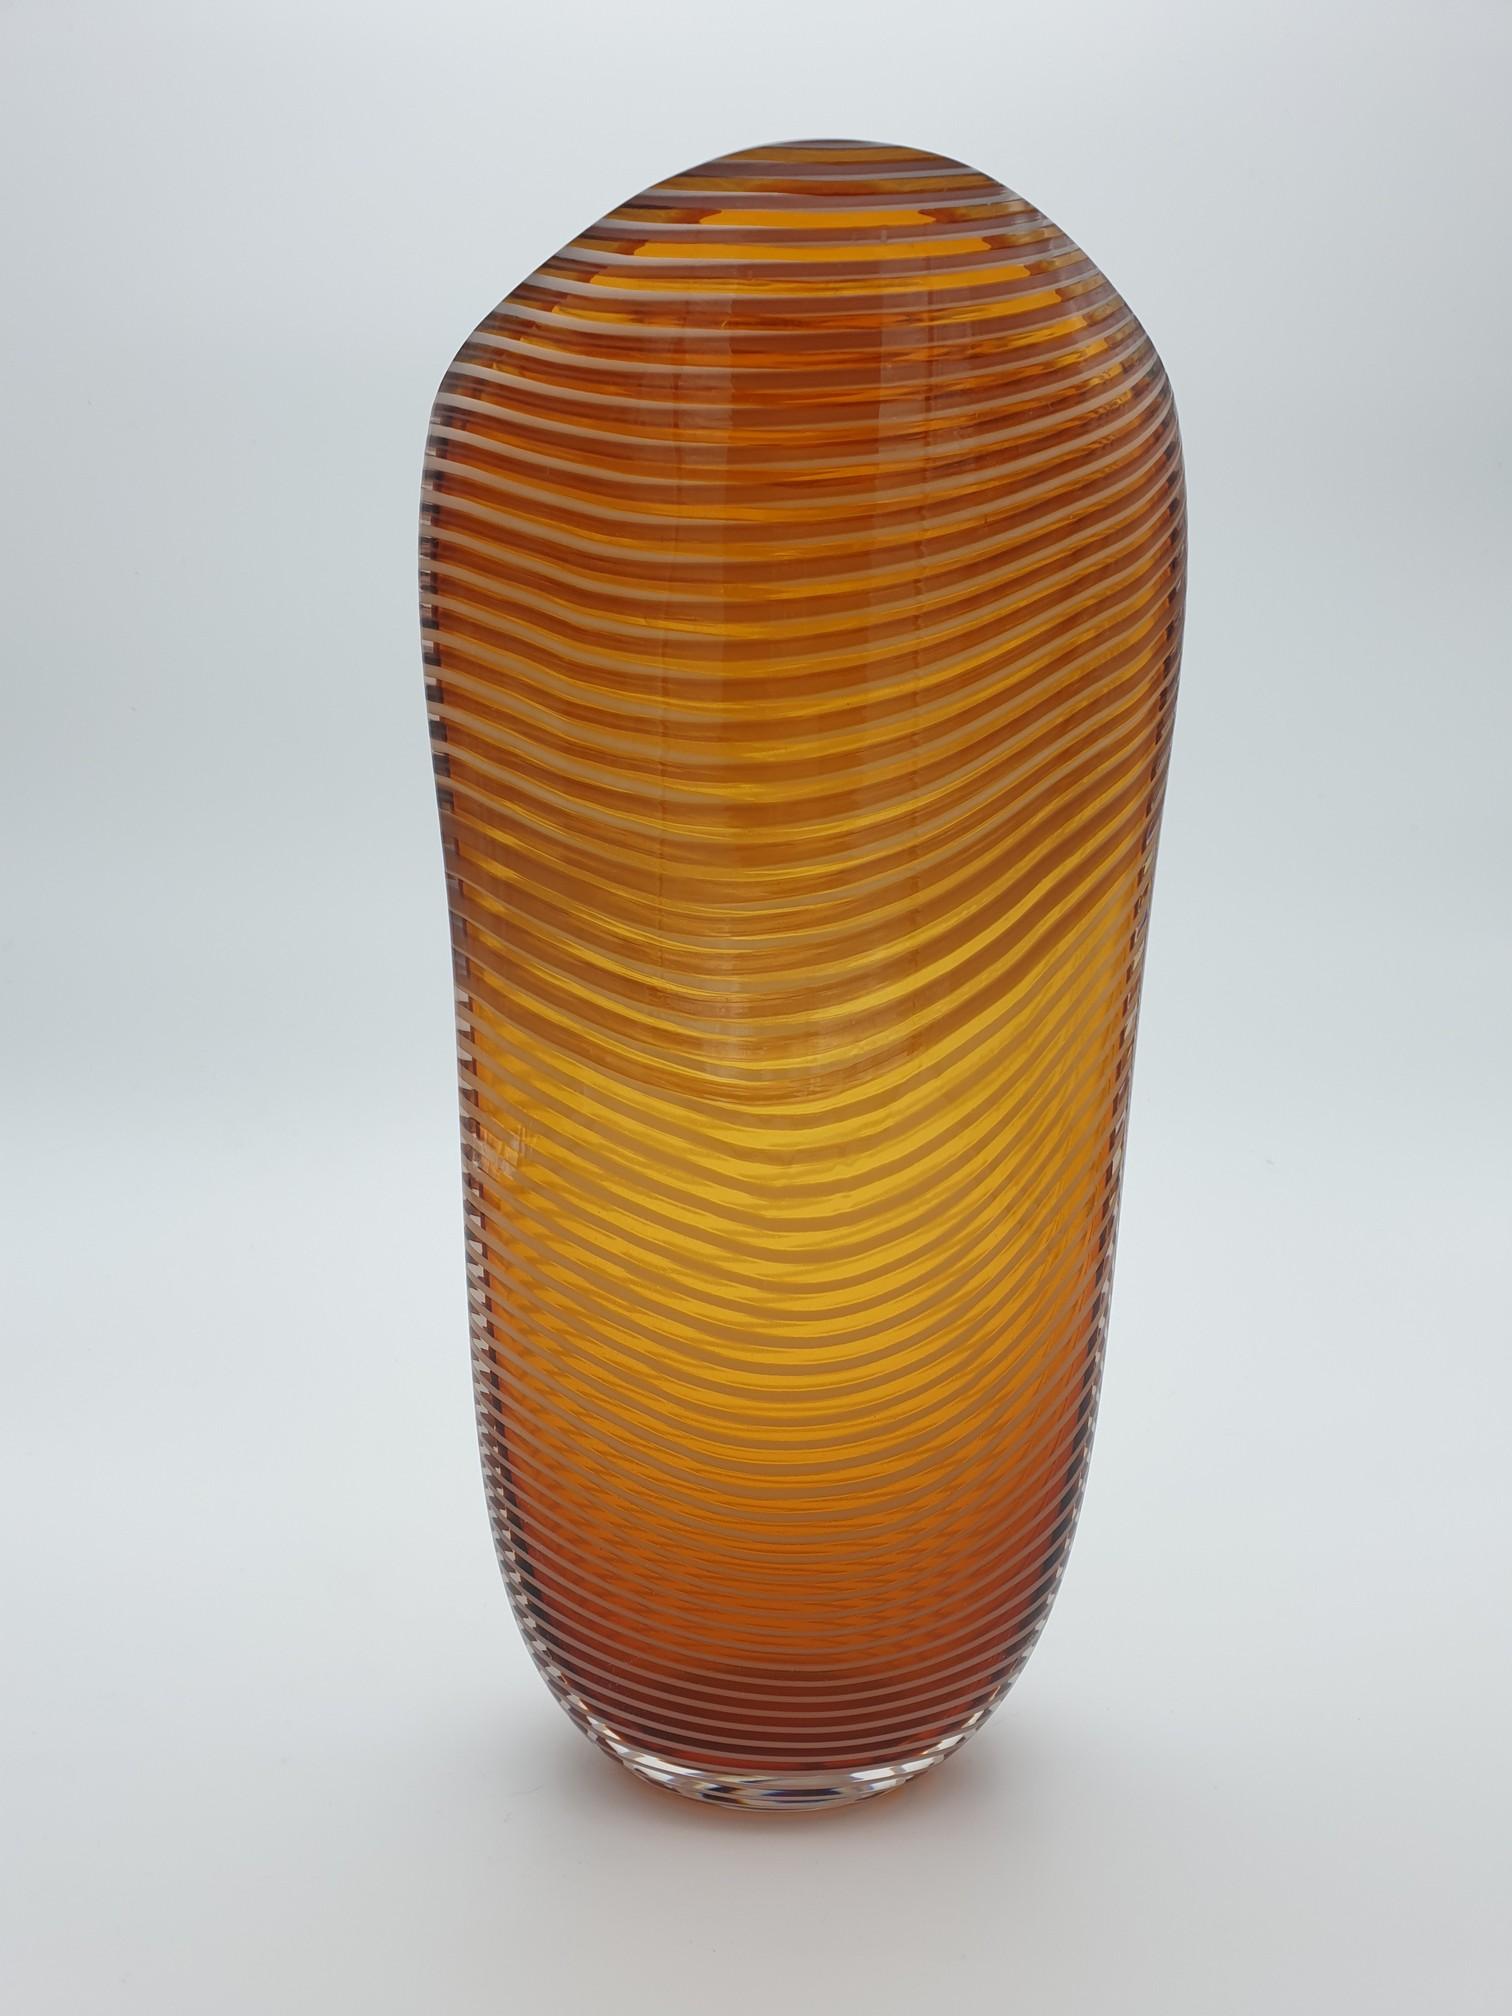 This modern stylish vase has been handmade in Murano by the glass-factory Gino Cenedese e Figlio. The vase is a beautiful warm amber color and has a milky colored spiral going all around; its cross section is oval and the lip is cut diagonally. The